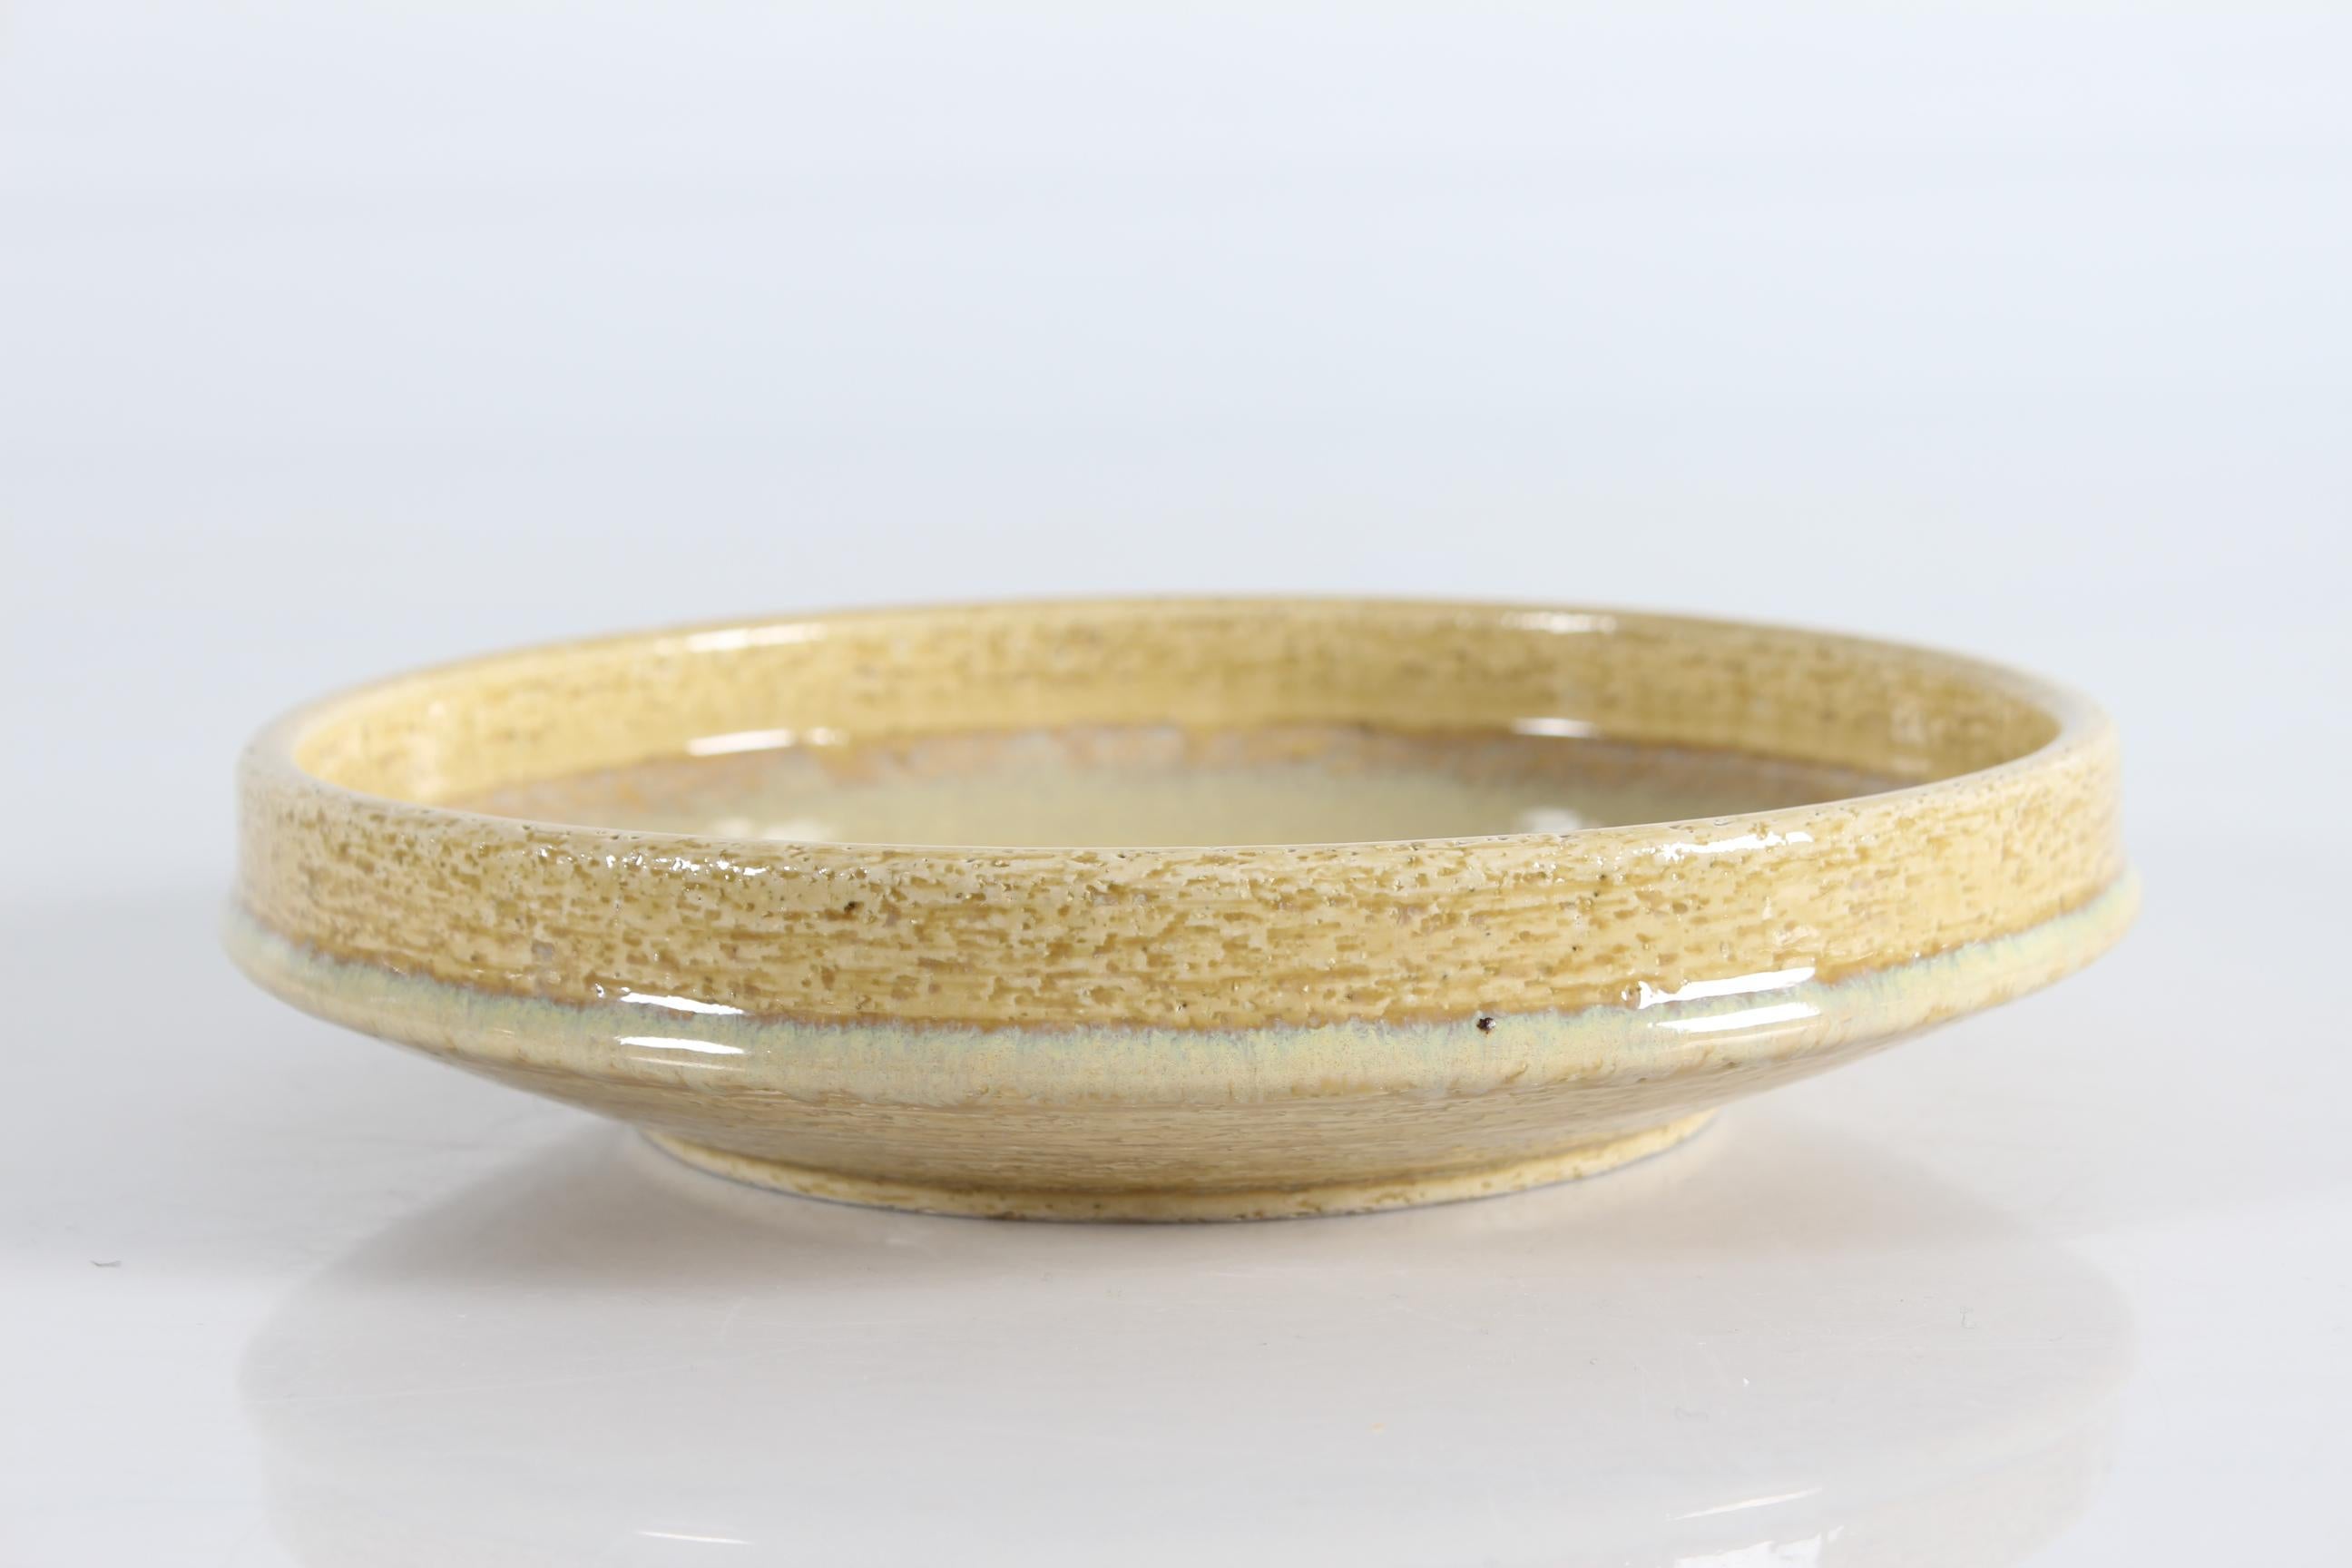 Flat stoneware bowl model no. C 103 by Per Linnemann-Schmidt for Palshus Denmark. Made ca 1960s.
It is made with chamotte clay which gives a rough and vivid surface. The glossy glaze is light yellow.

The bowl is fully marked on bottom with